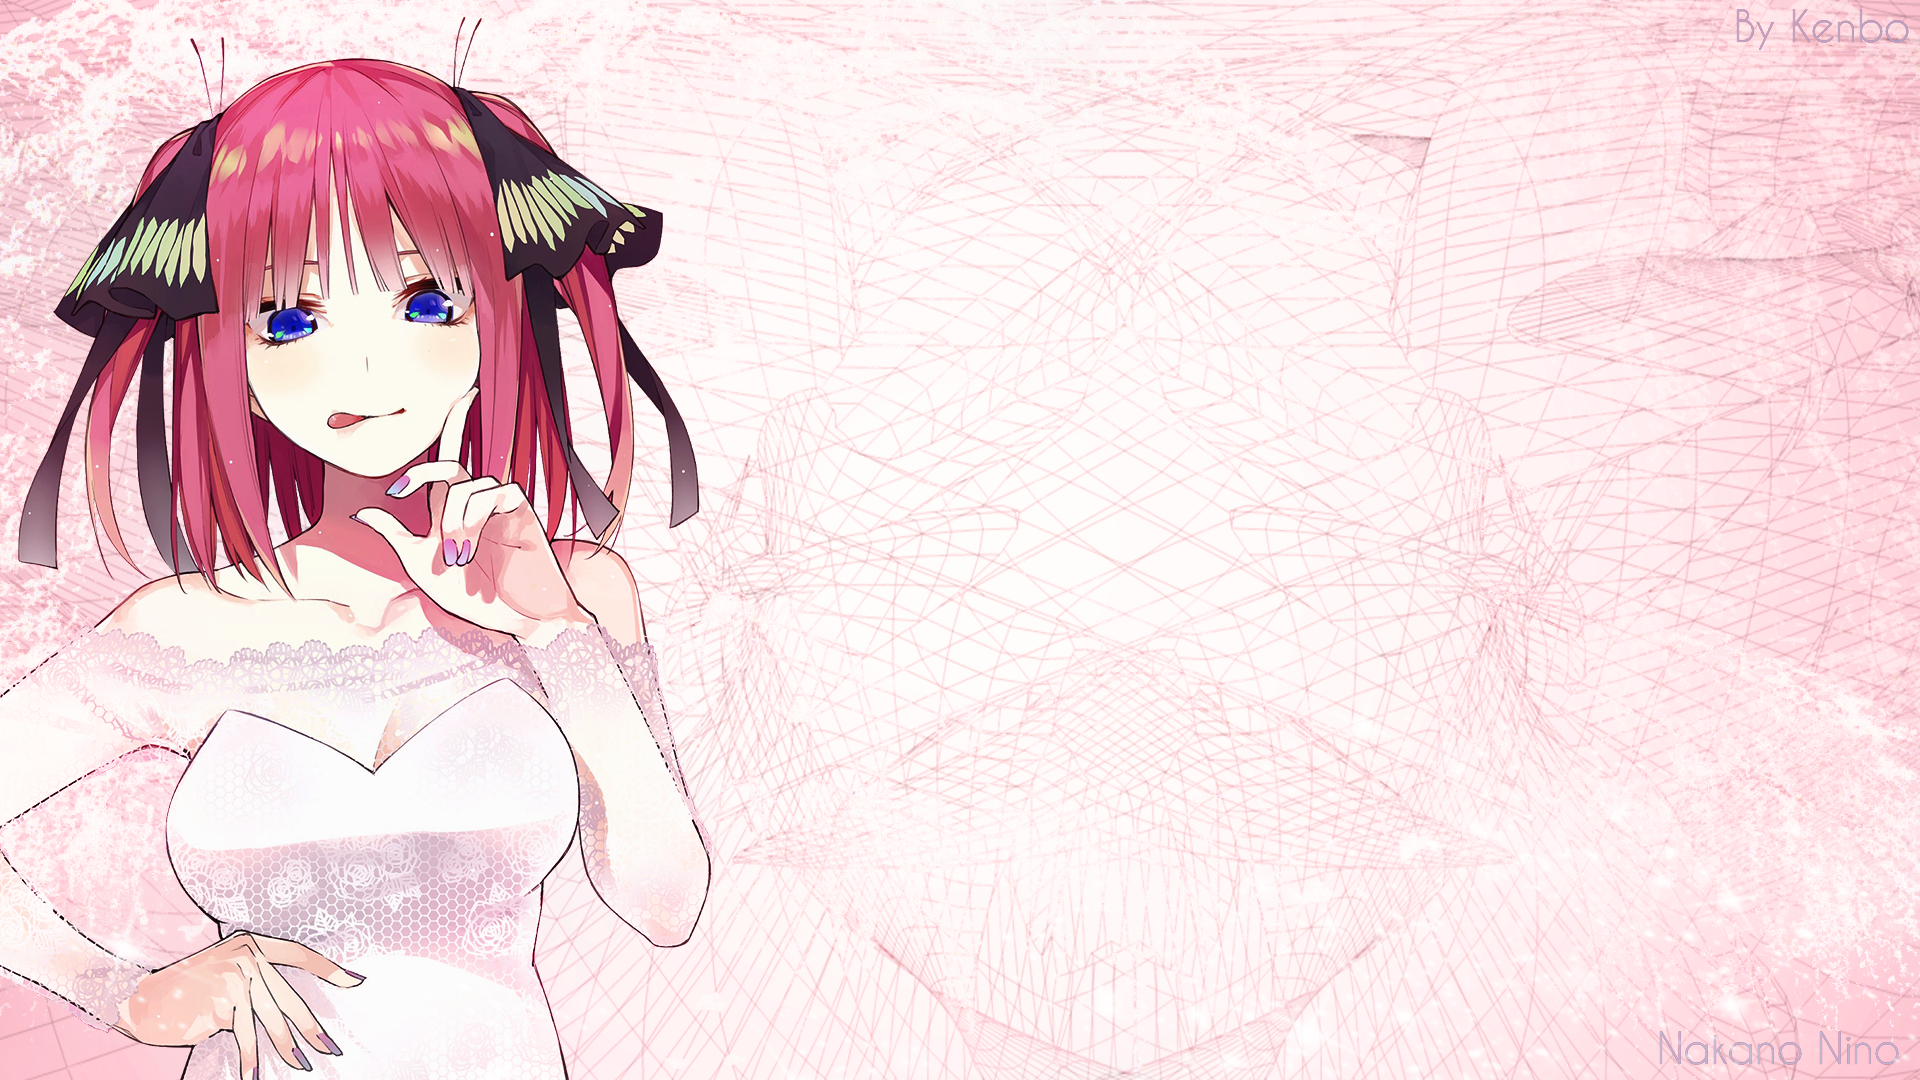 Anime 1920x1080 5-toubun no Hanayome anime girls Nakano Nino picture-in-picture anime purple eyes blue eyes sunglasses dress headband wedding dress white dress redhead pink hair twintails smiling 2D tongue out silhouette